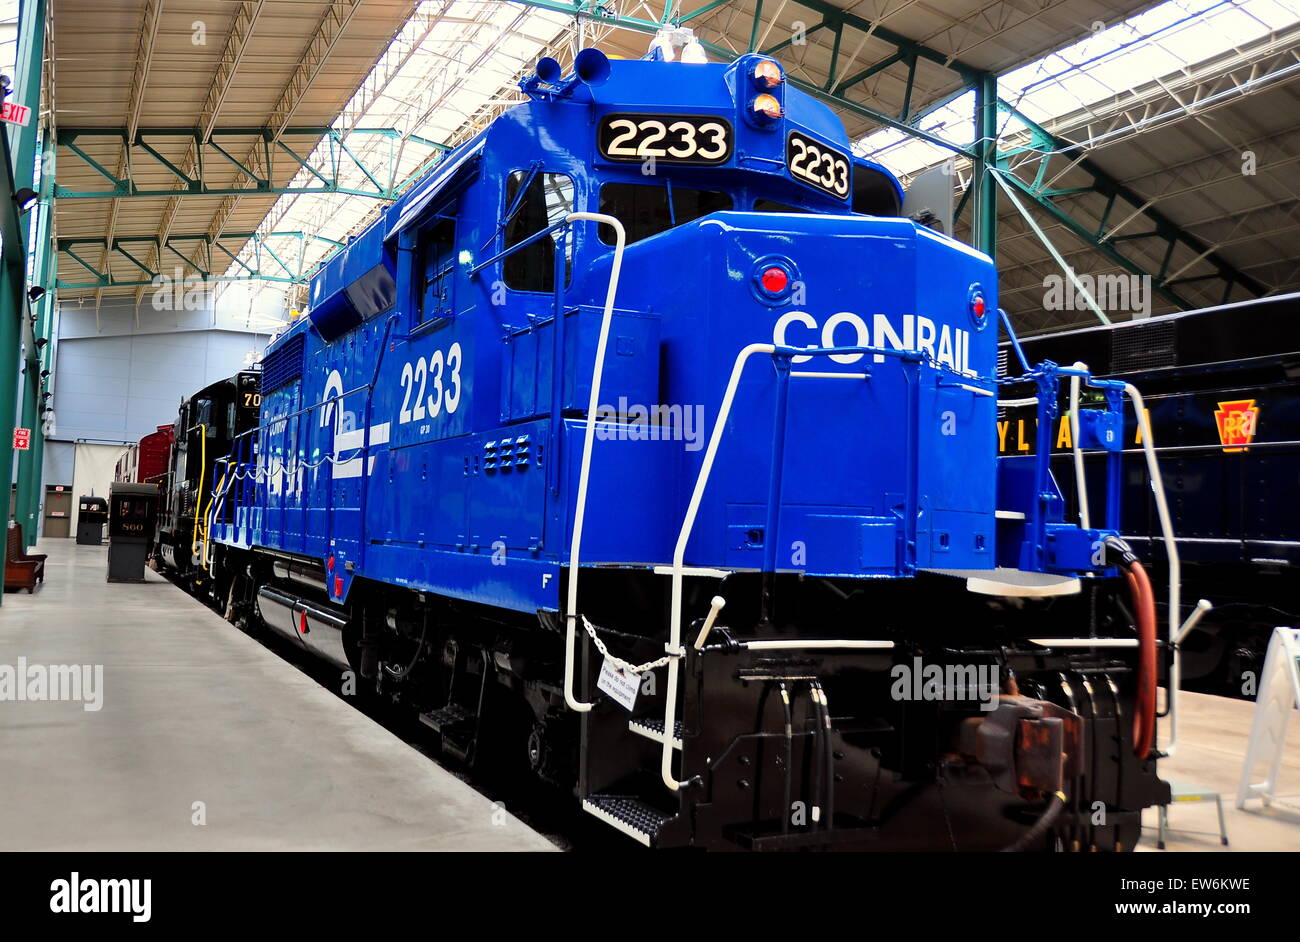 Strasburg, Pennsylvania:  A bright blue diesel Conrail engine in the display shed at the Railroad Museum of Pennsylvania  * Stock Photo